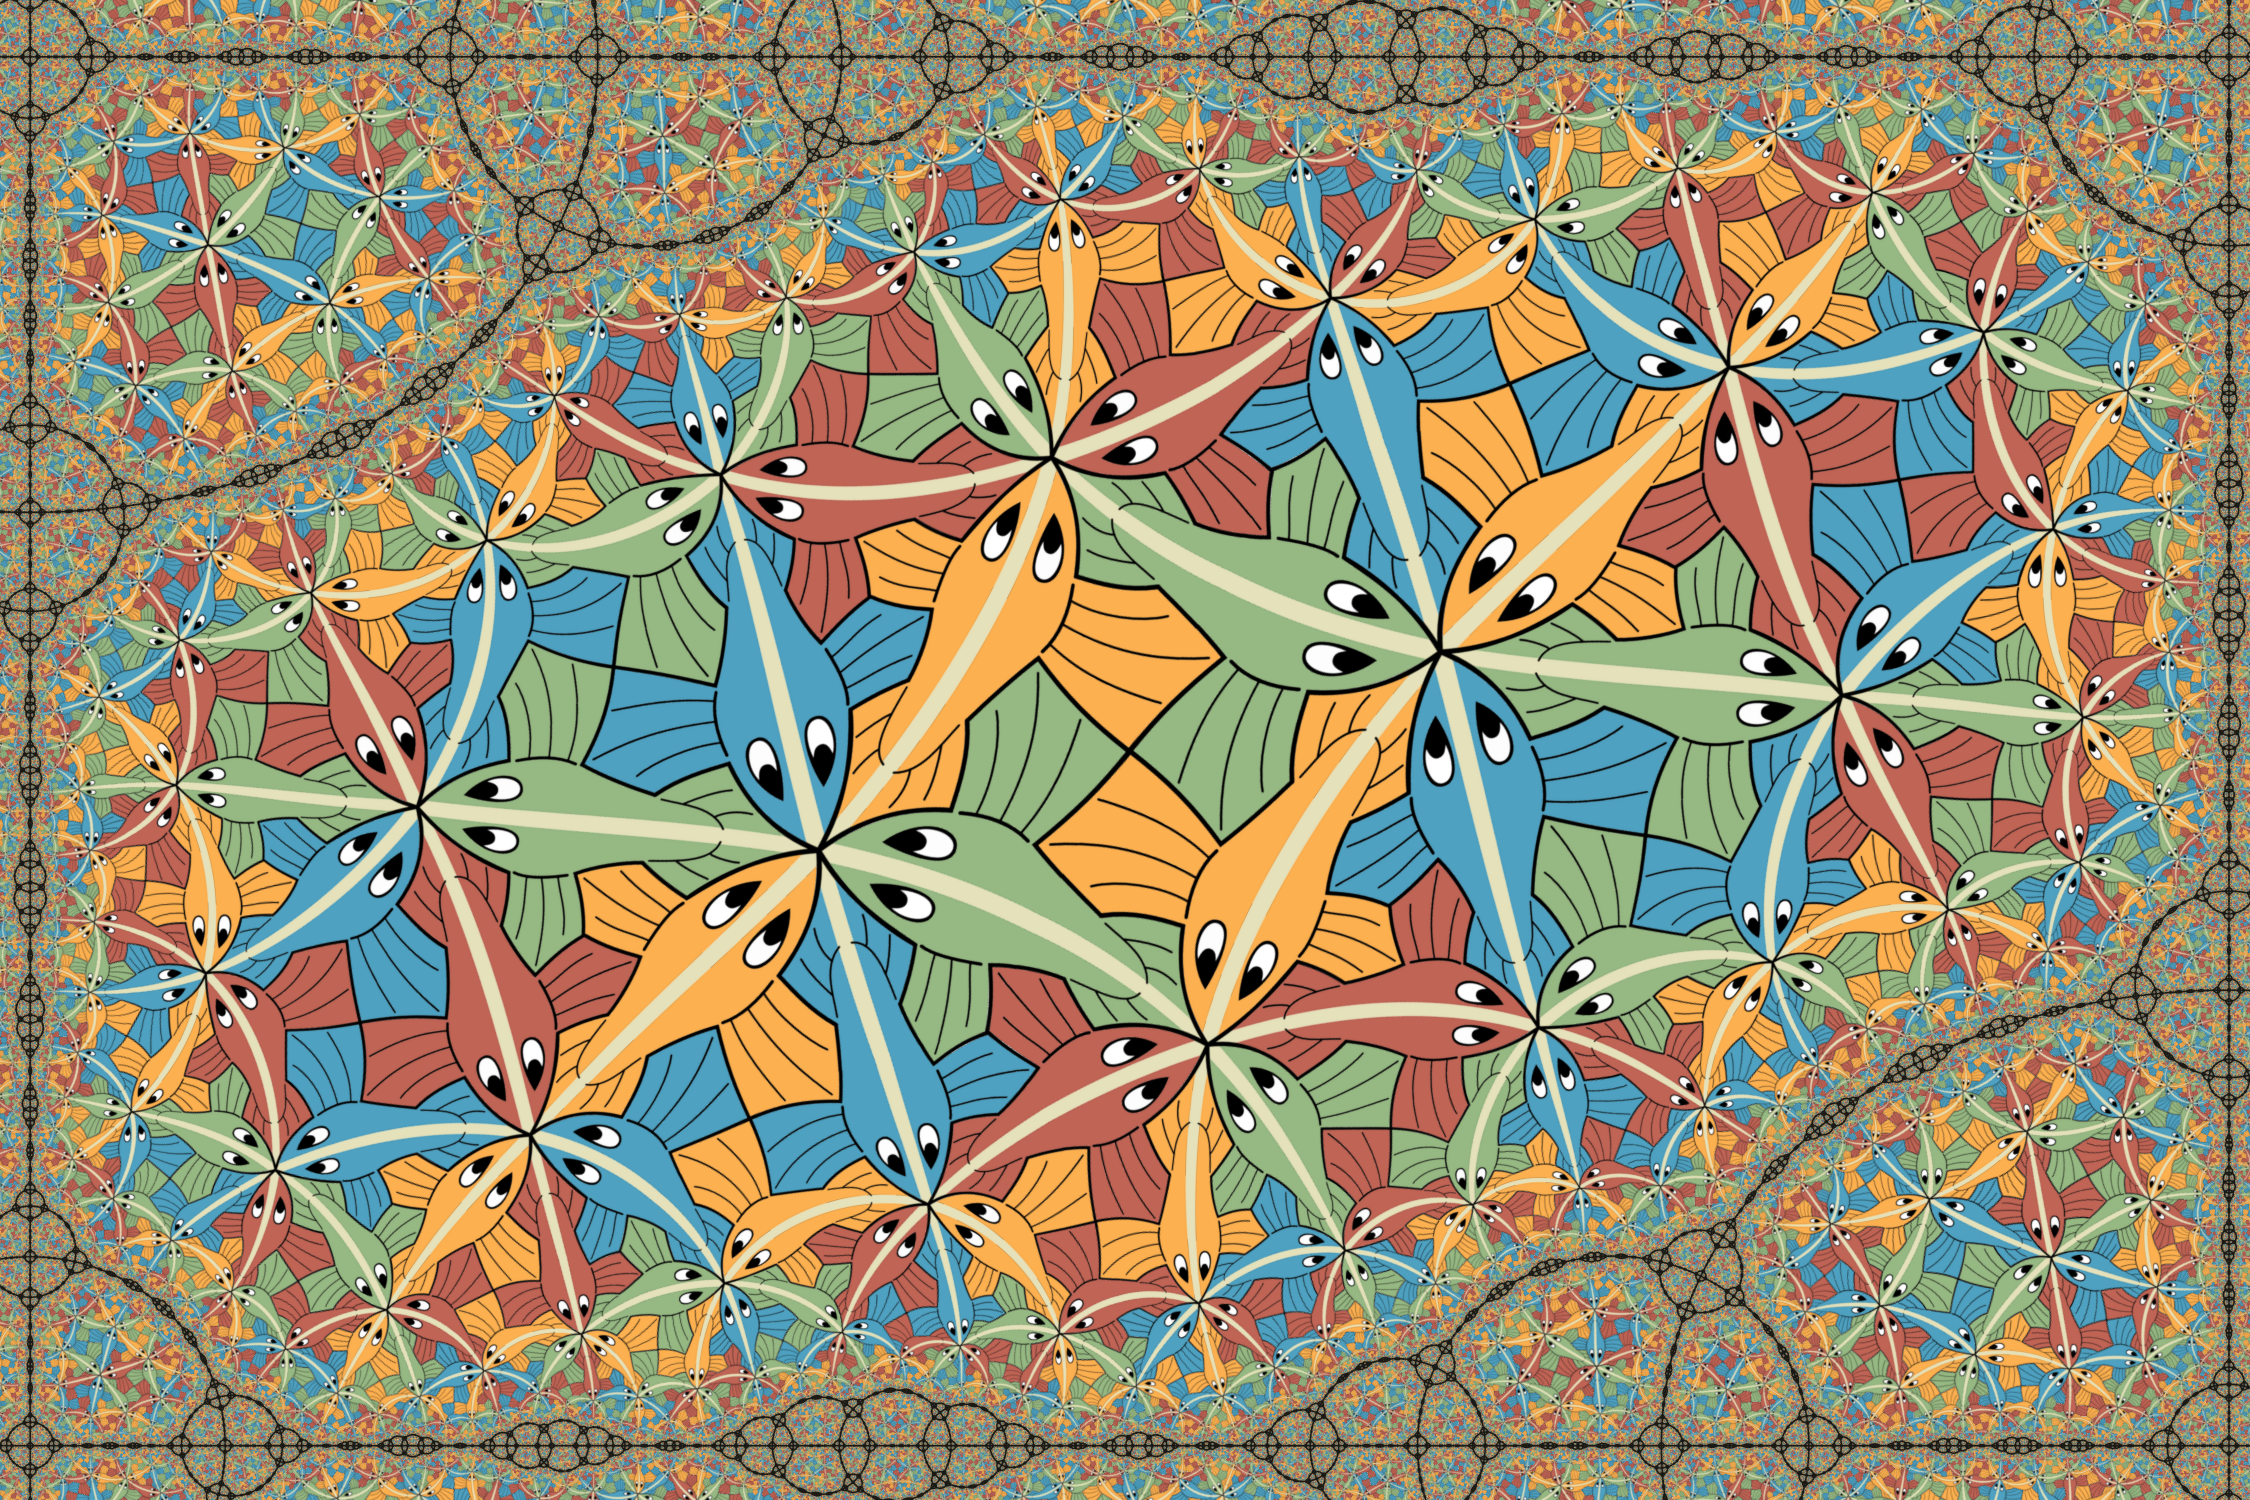 General 2250x1500 optical illusion M. C. Escher psychedelic animals symmetry colorful fish